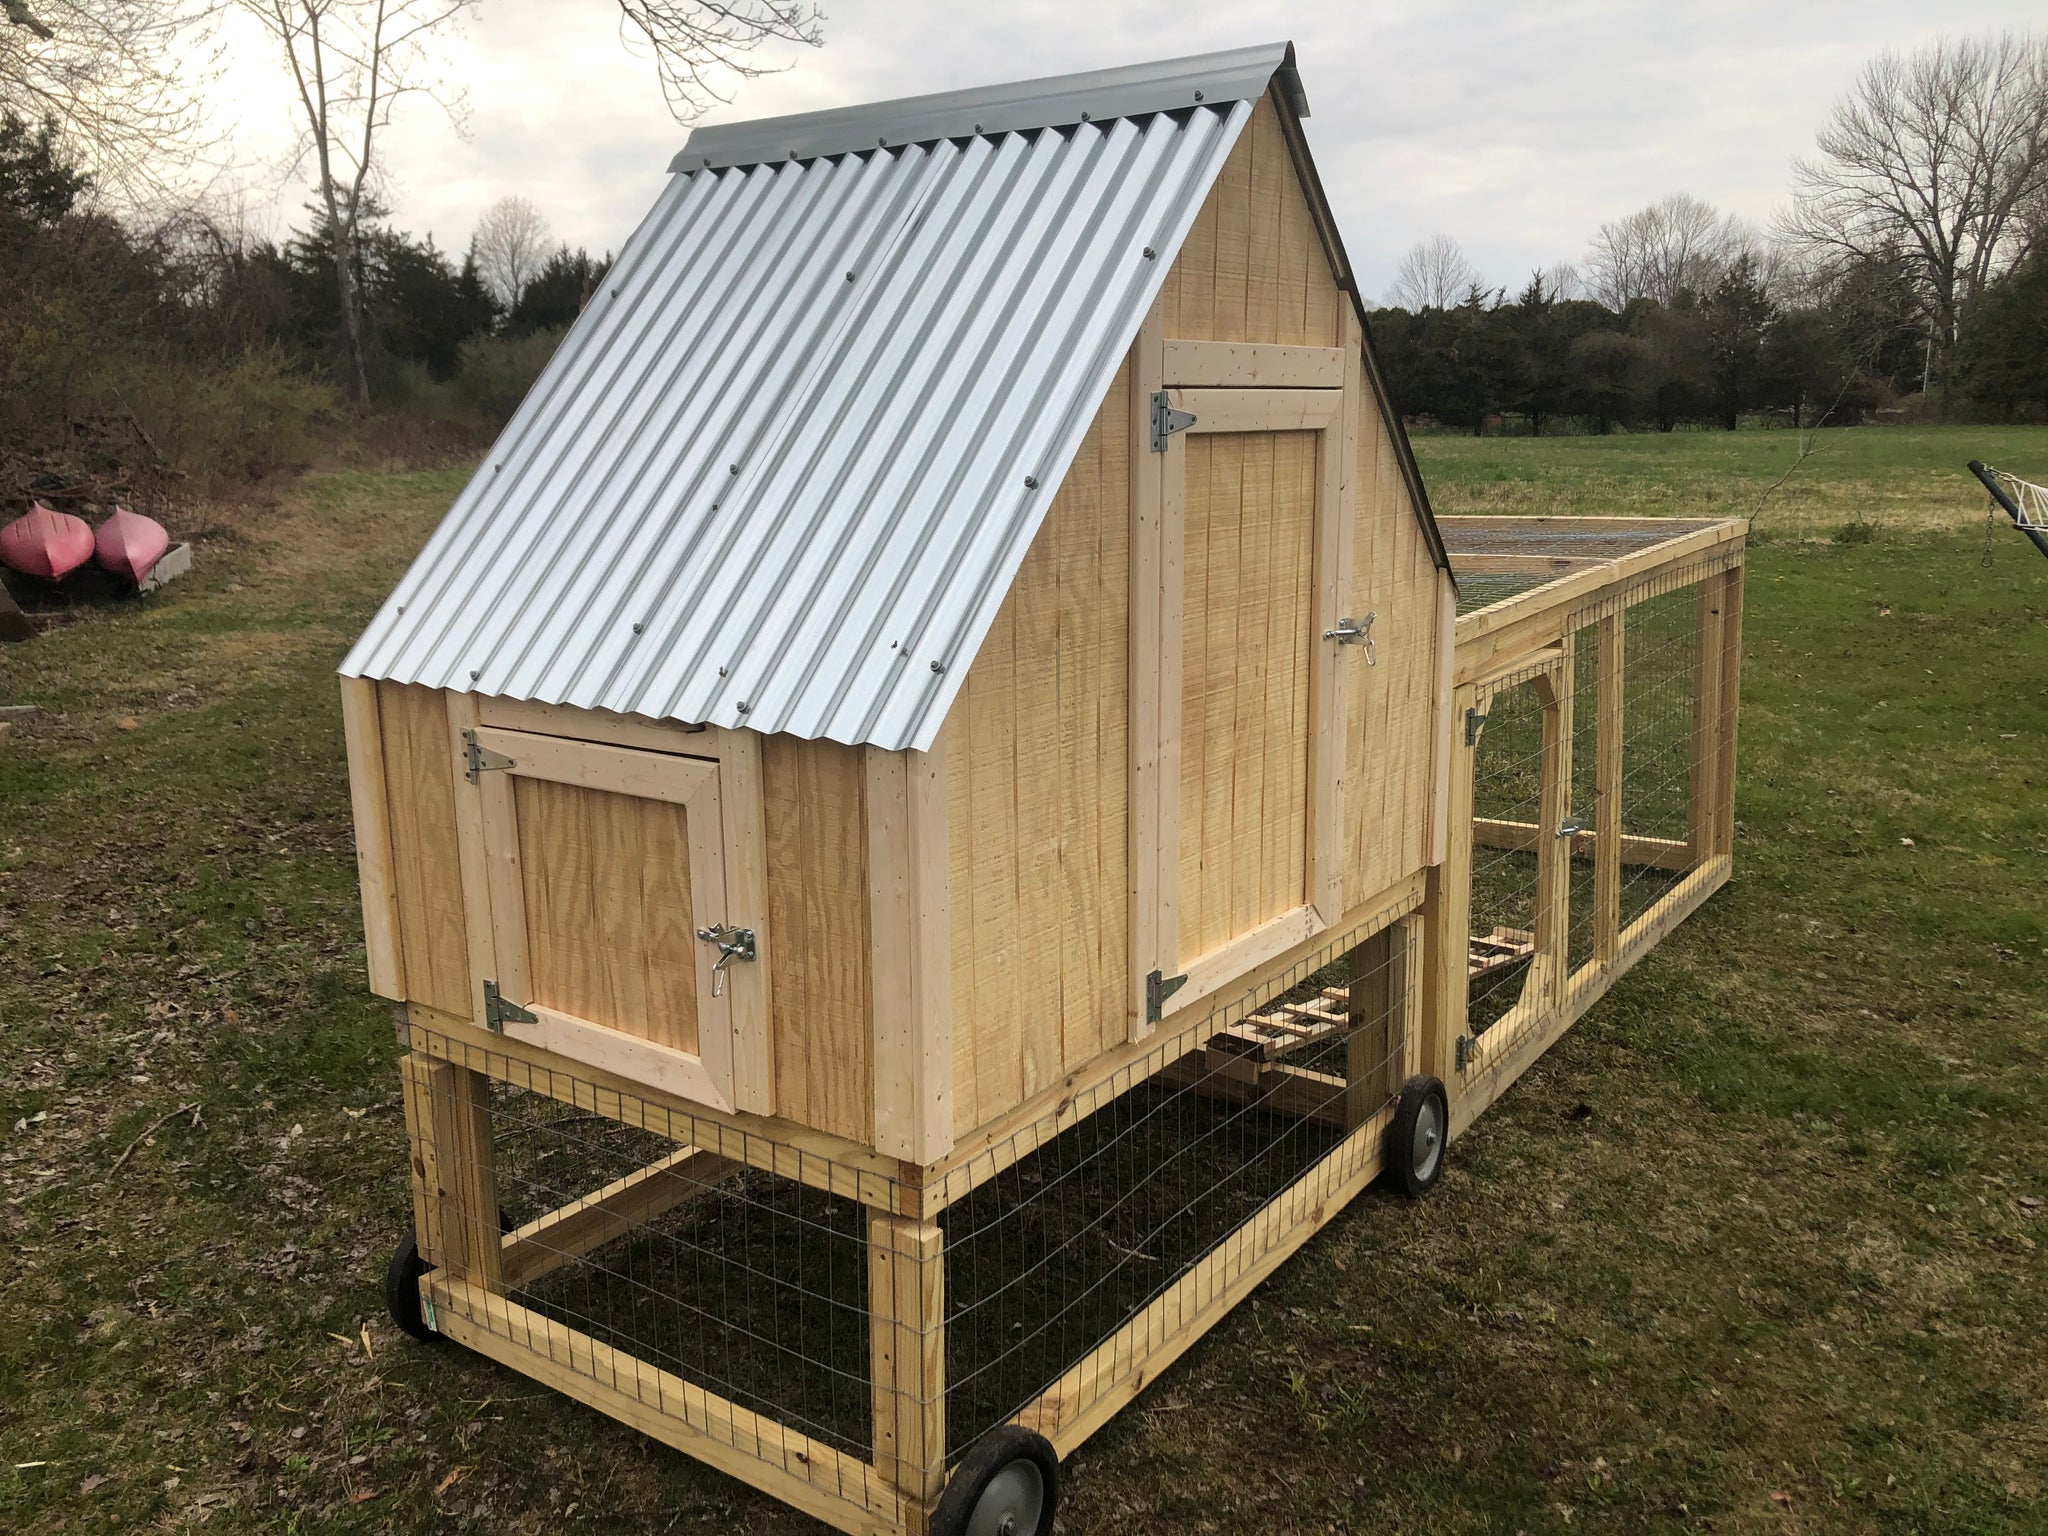 Tag: chicken coops - Timber Creek Farm